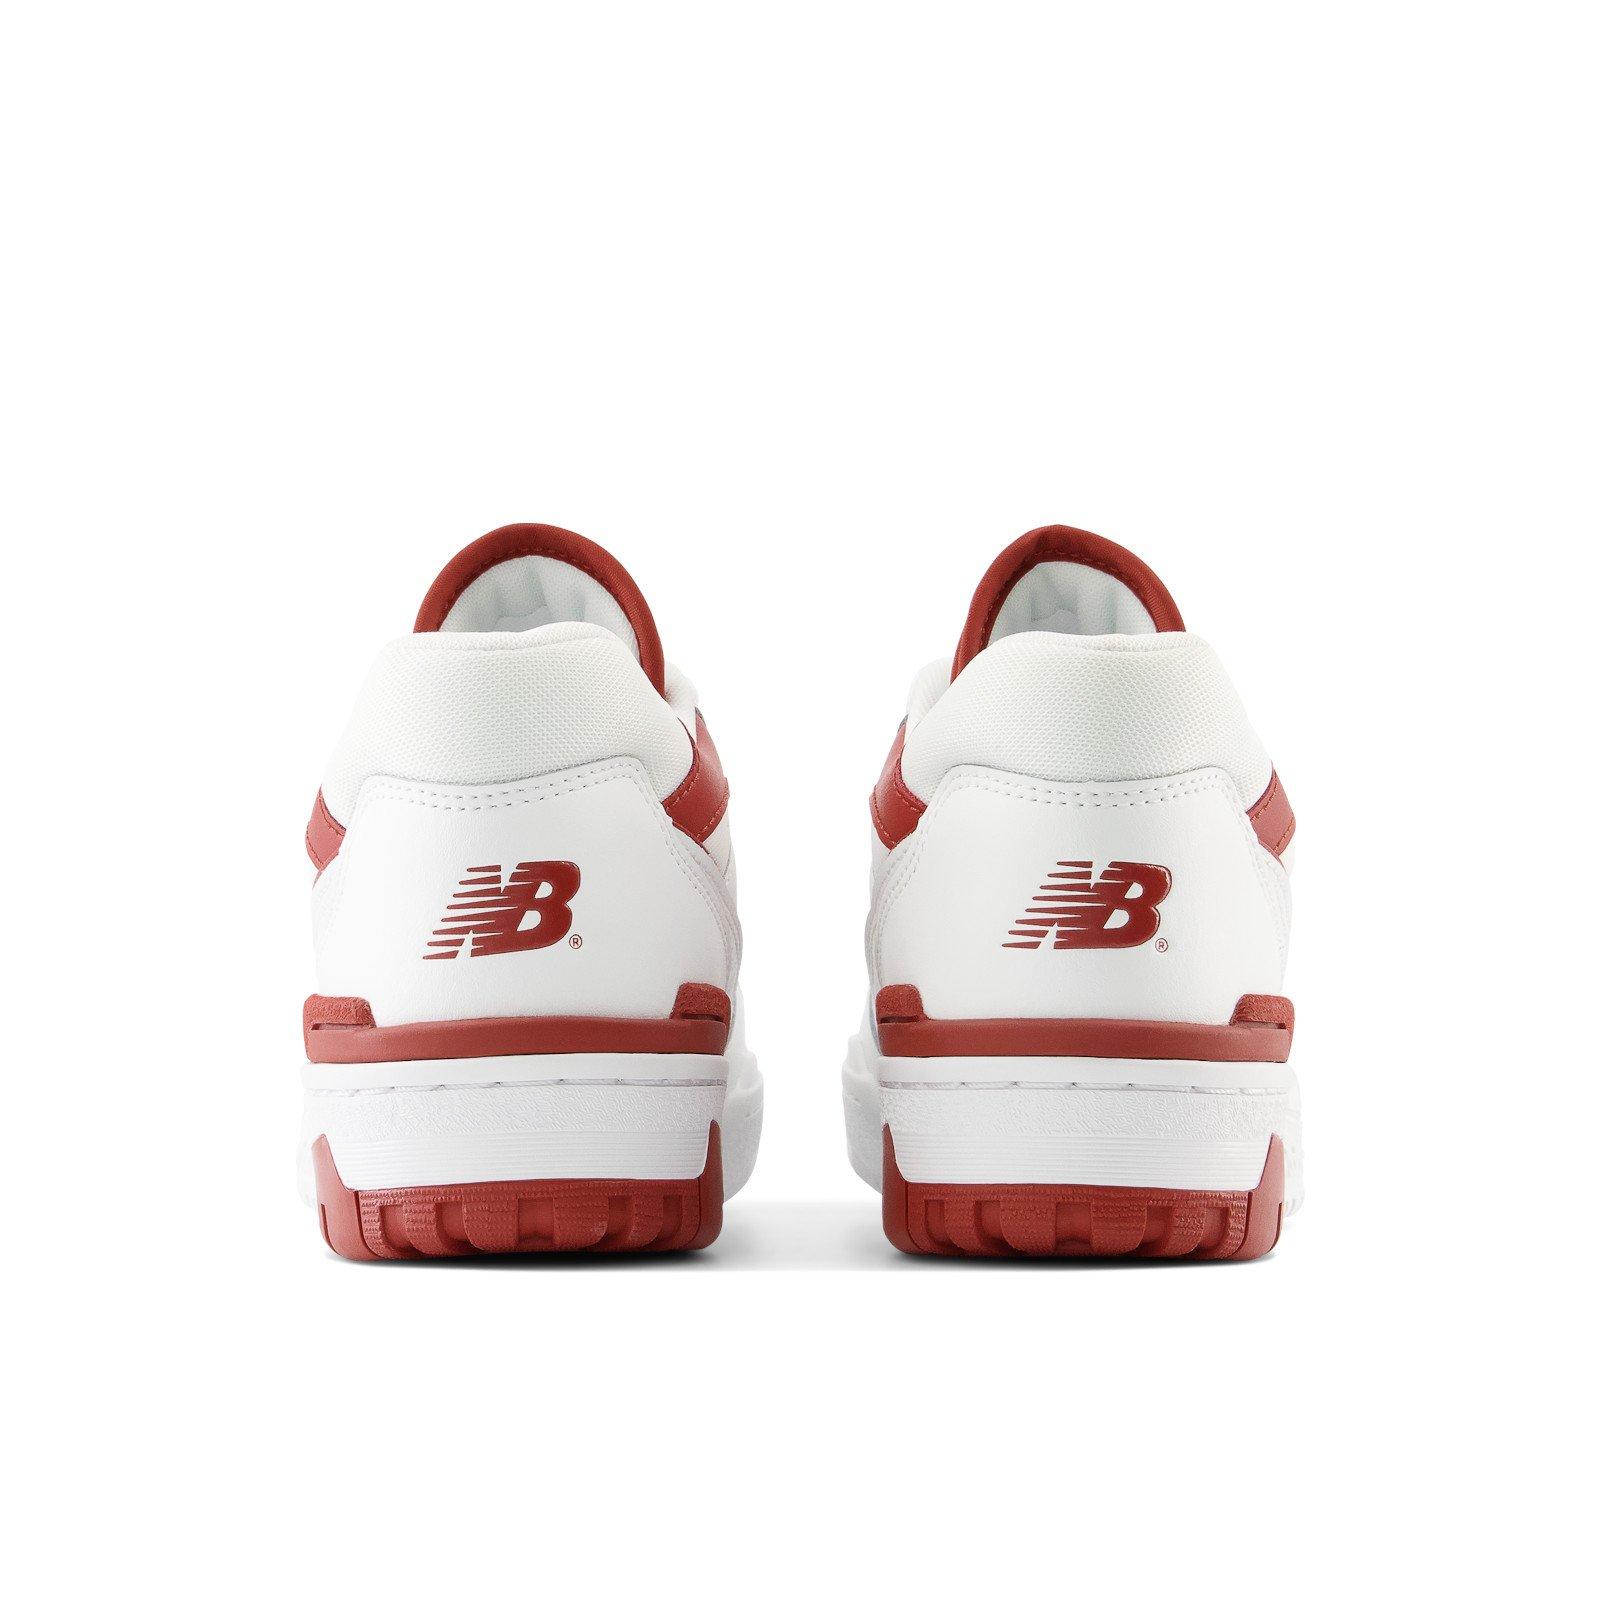 New Balance Women's 550 - White/Red/Pink (Size 5.5)